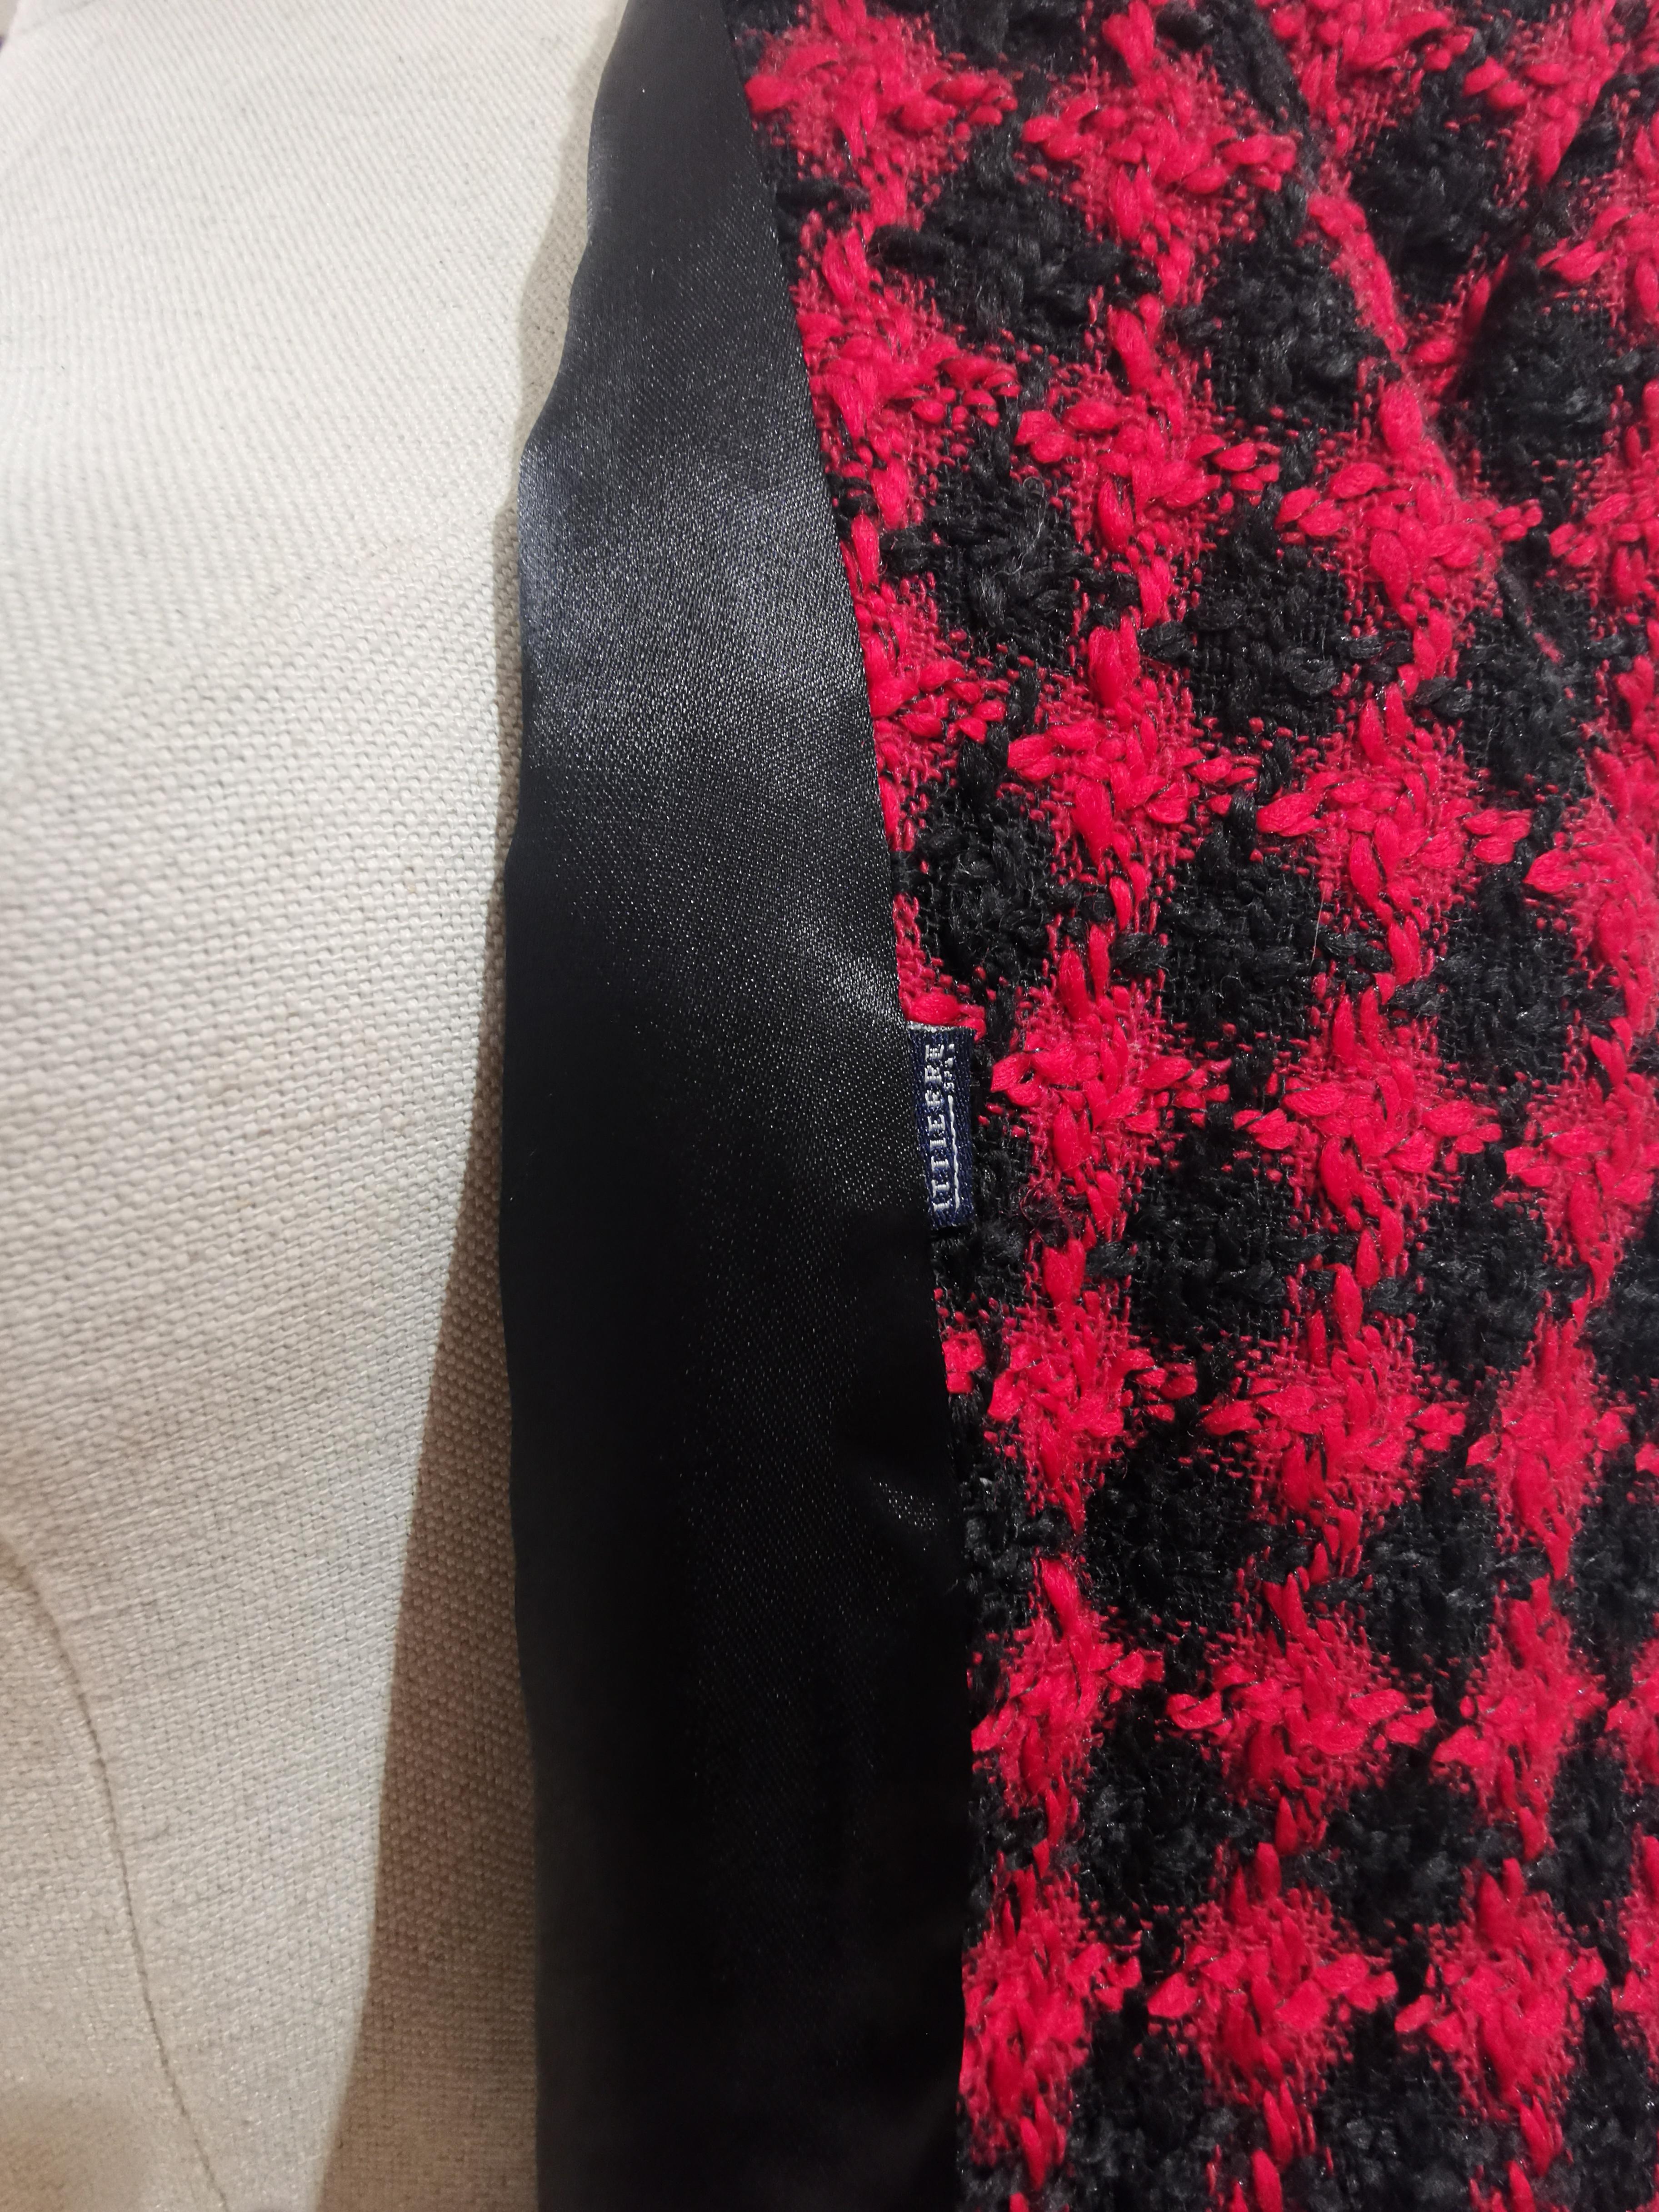 Brown Gianni Versace red and black wool skirt suit